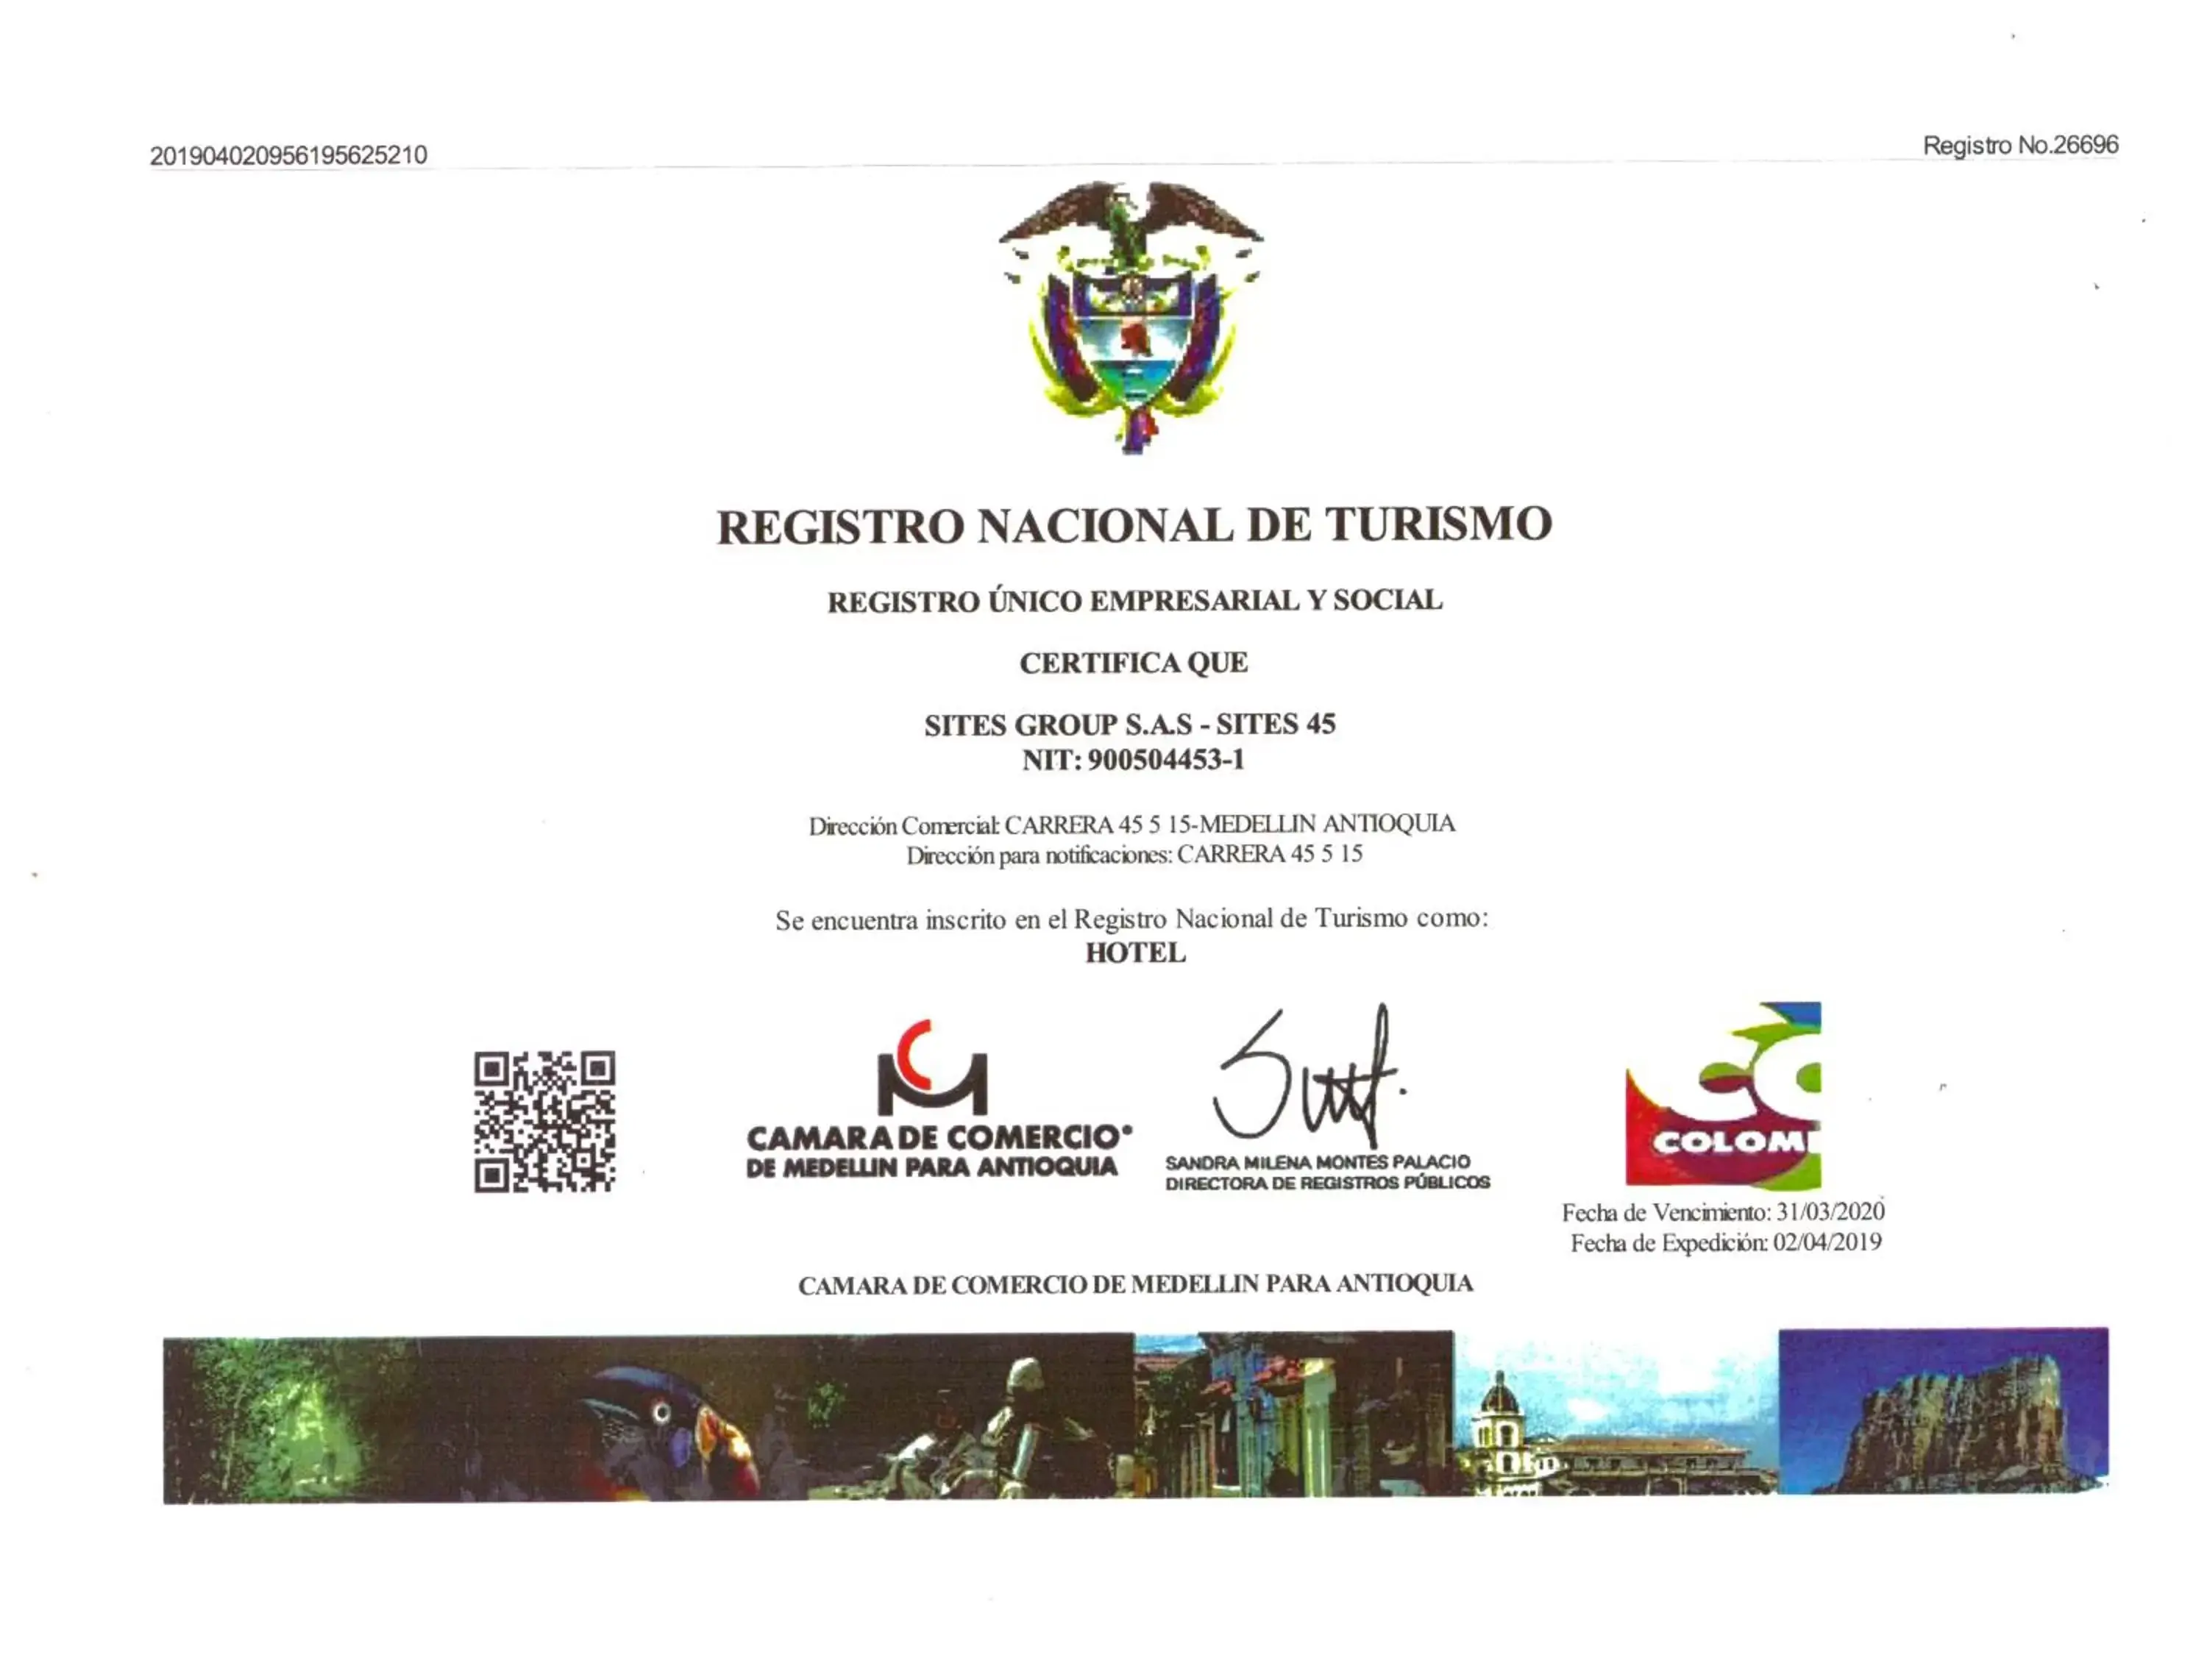 Logo/Certificate/Sign in Sites Hotel